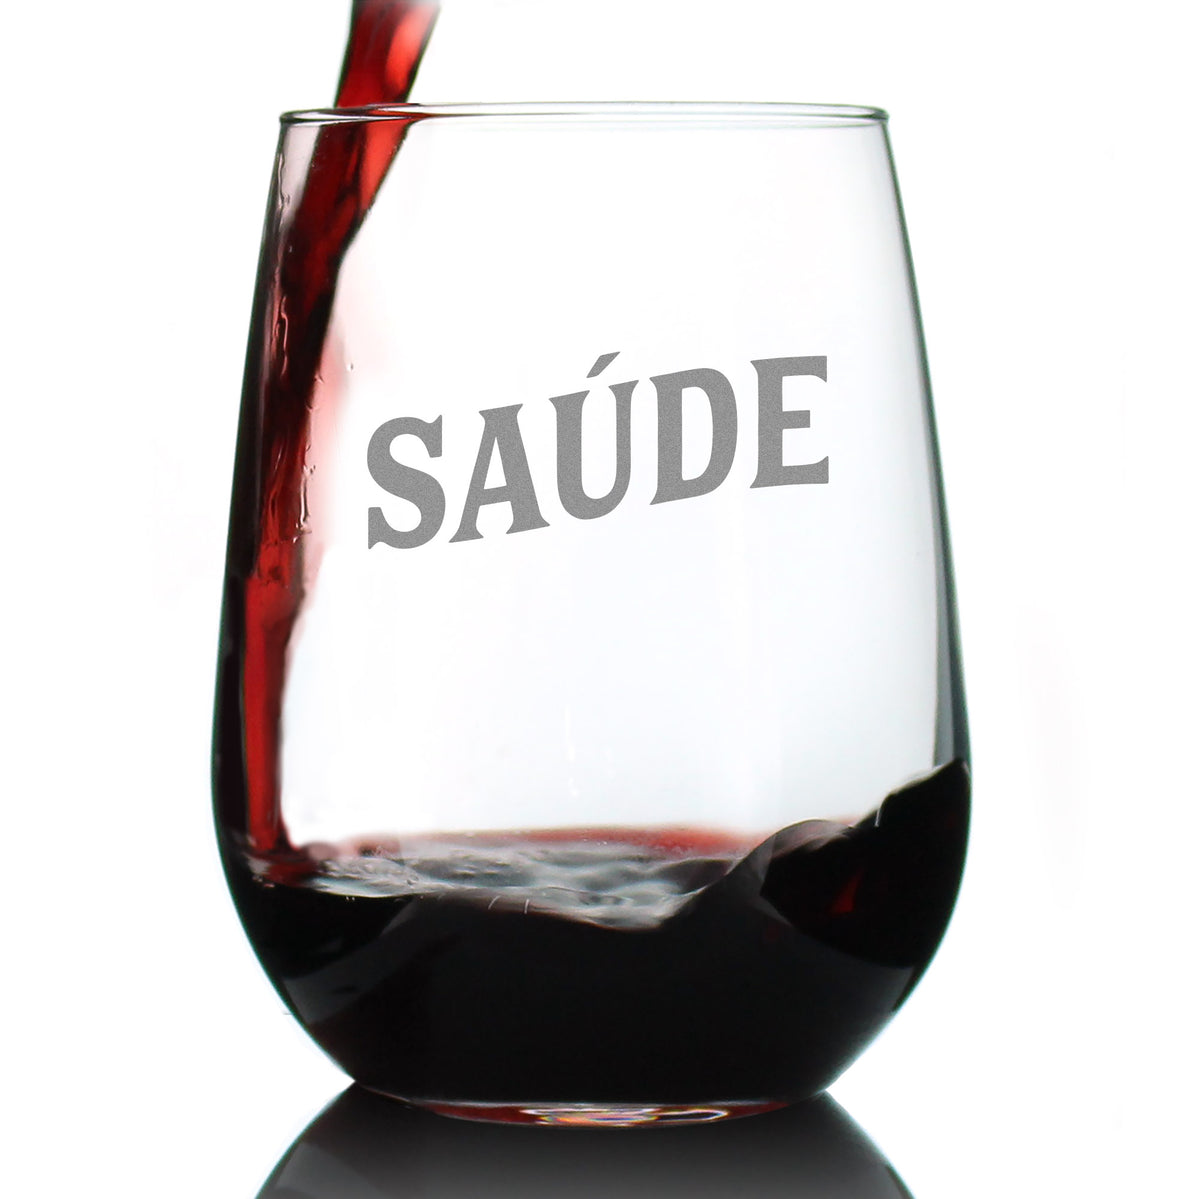 Saude - Portuguese Cheers - Stemless Wine Glass - Cute Portugal Themed Gifts or Party Decor for Women - Large